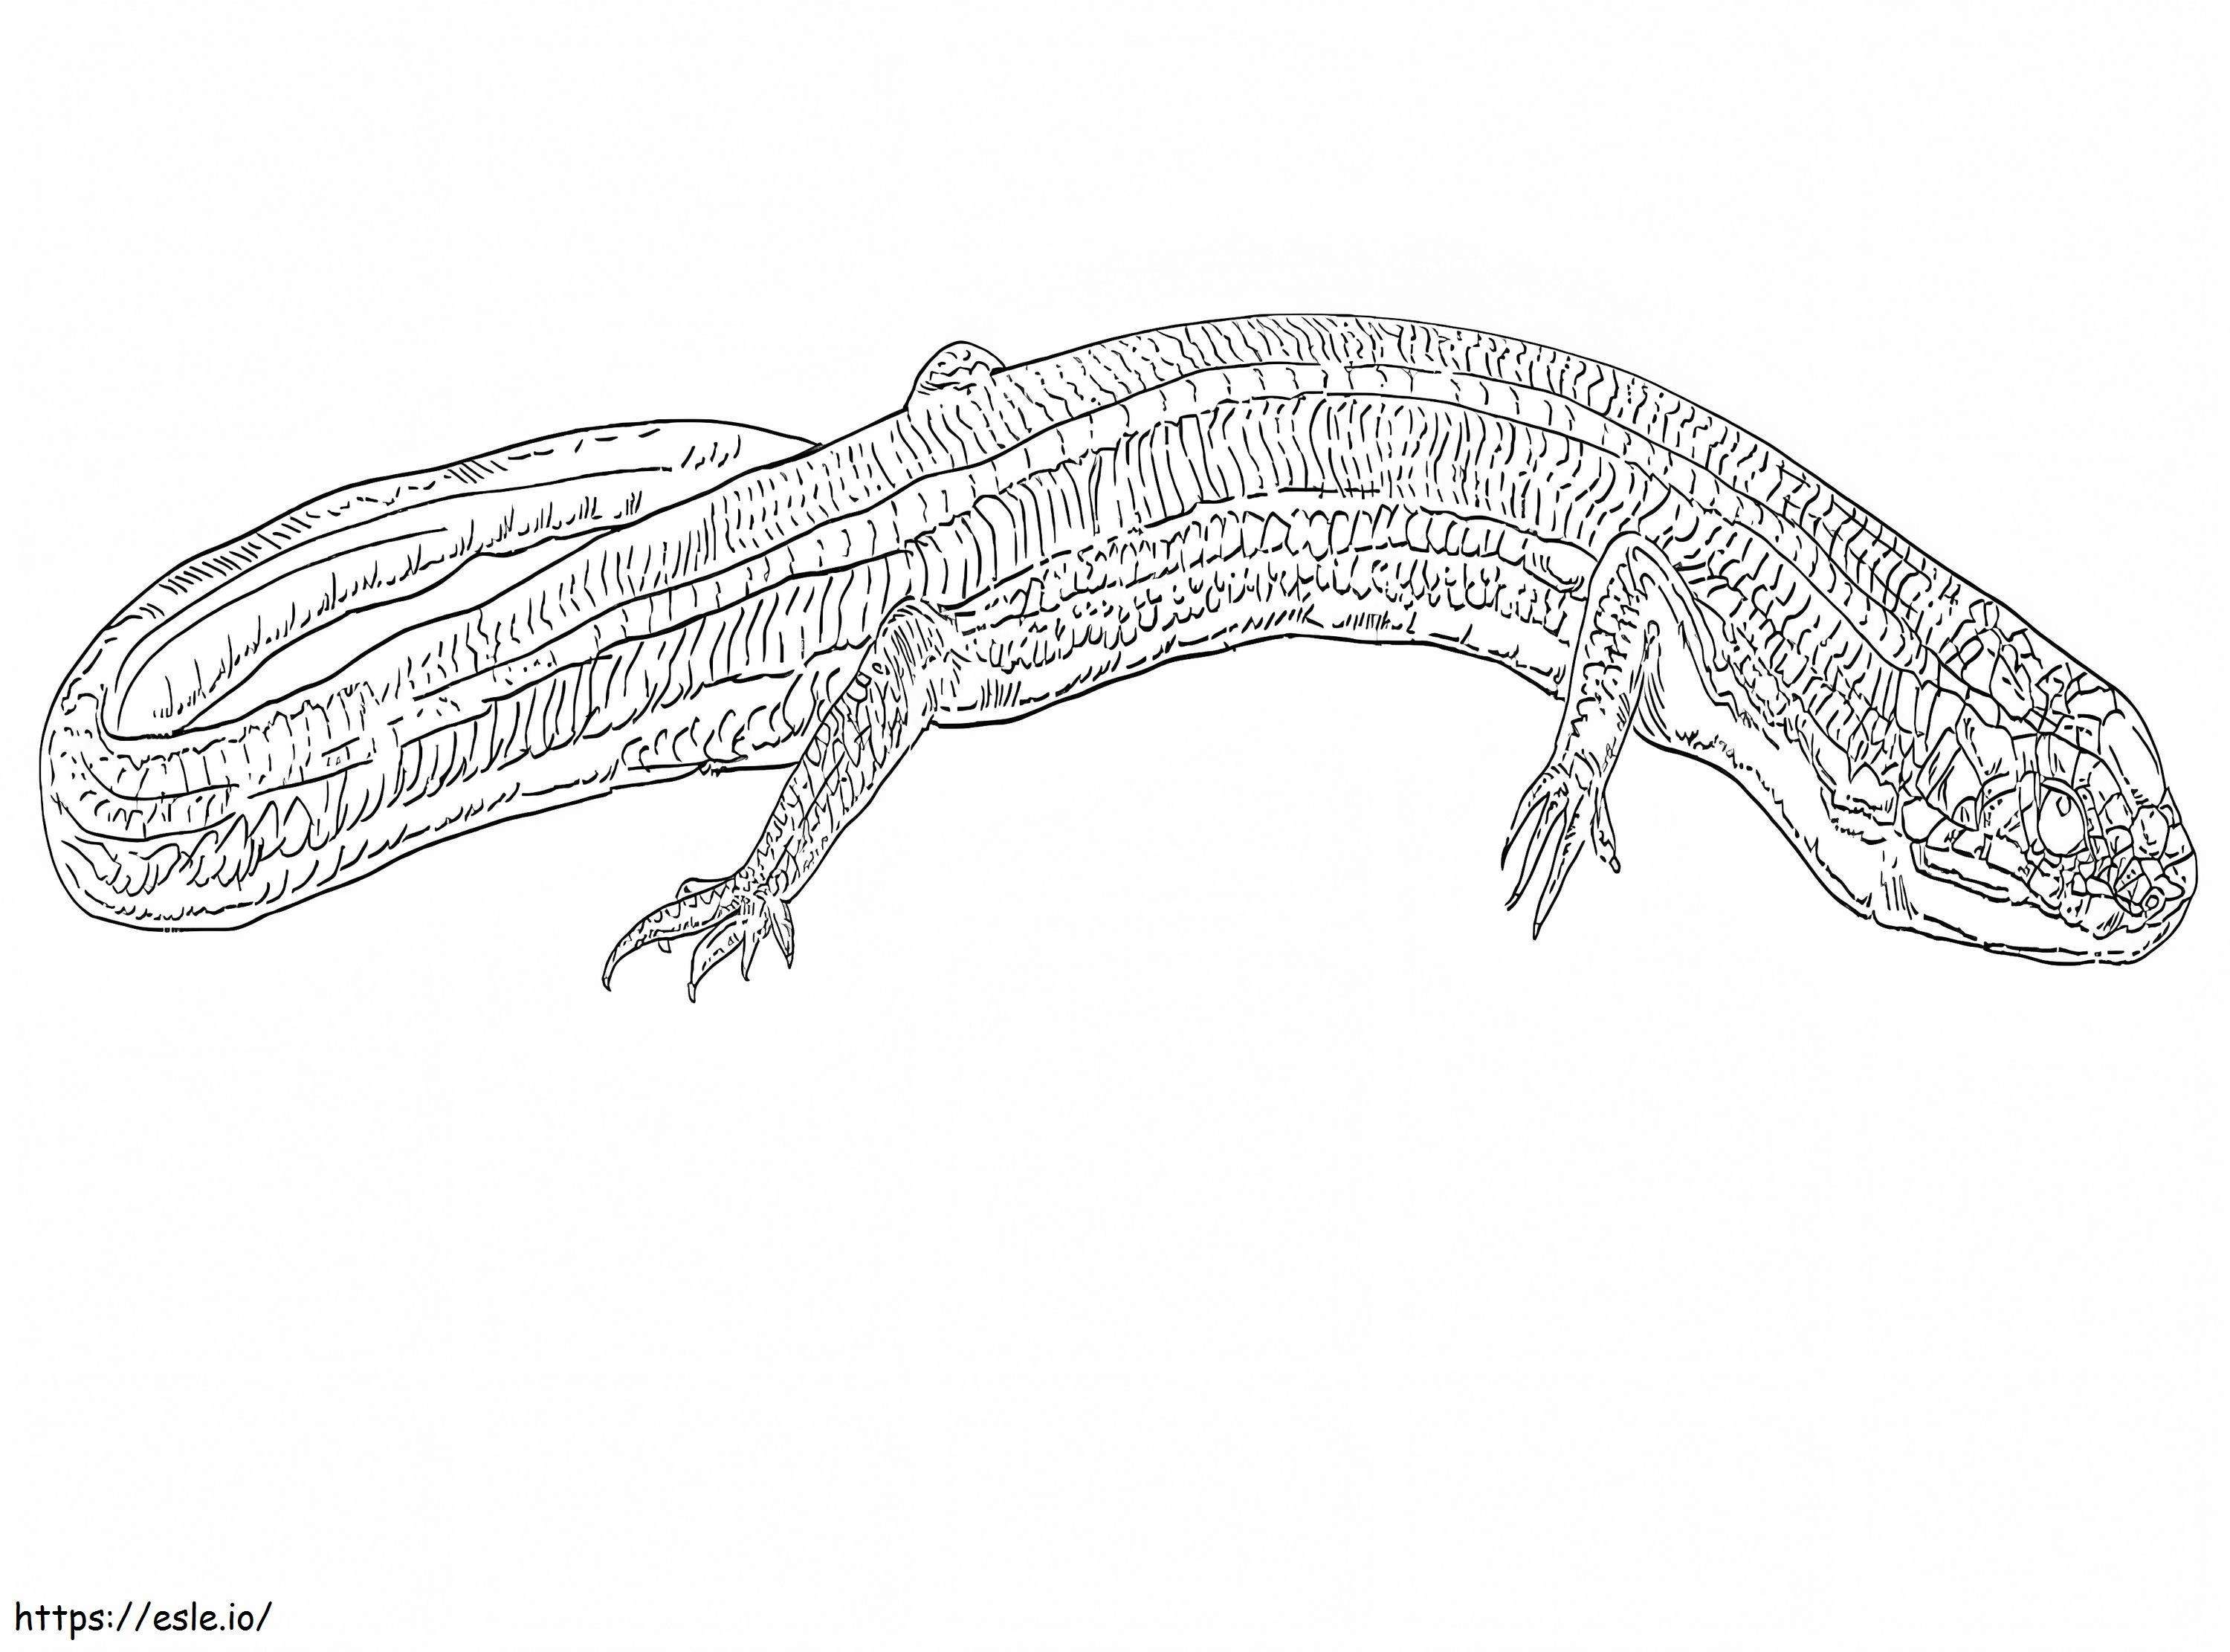 Five Lined Skink coloring page